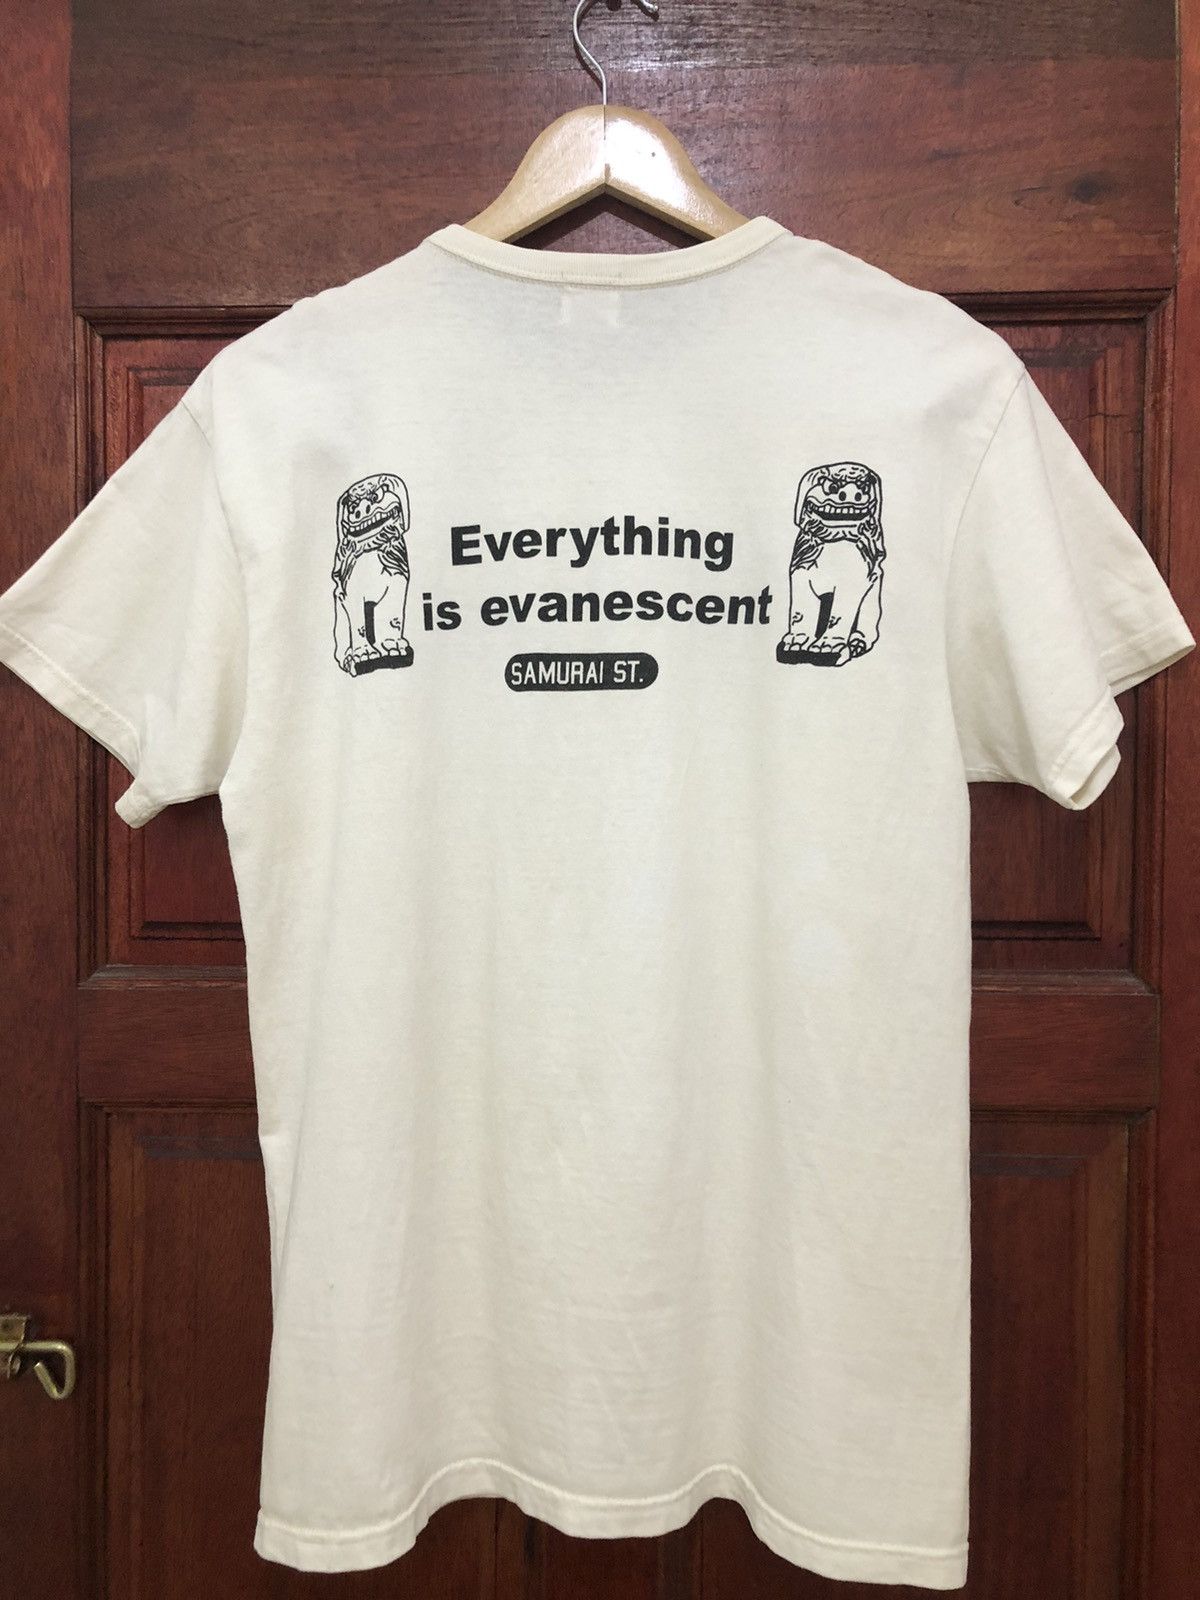 Vintage 90s Samurai Jeans ‘Everything Is Evanescent Shirt - 1